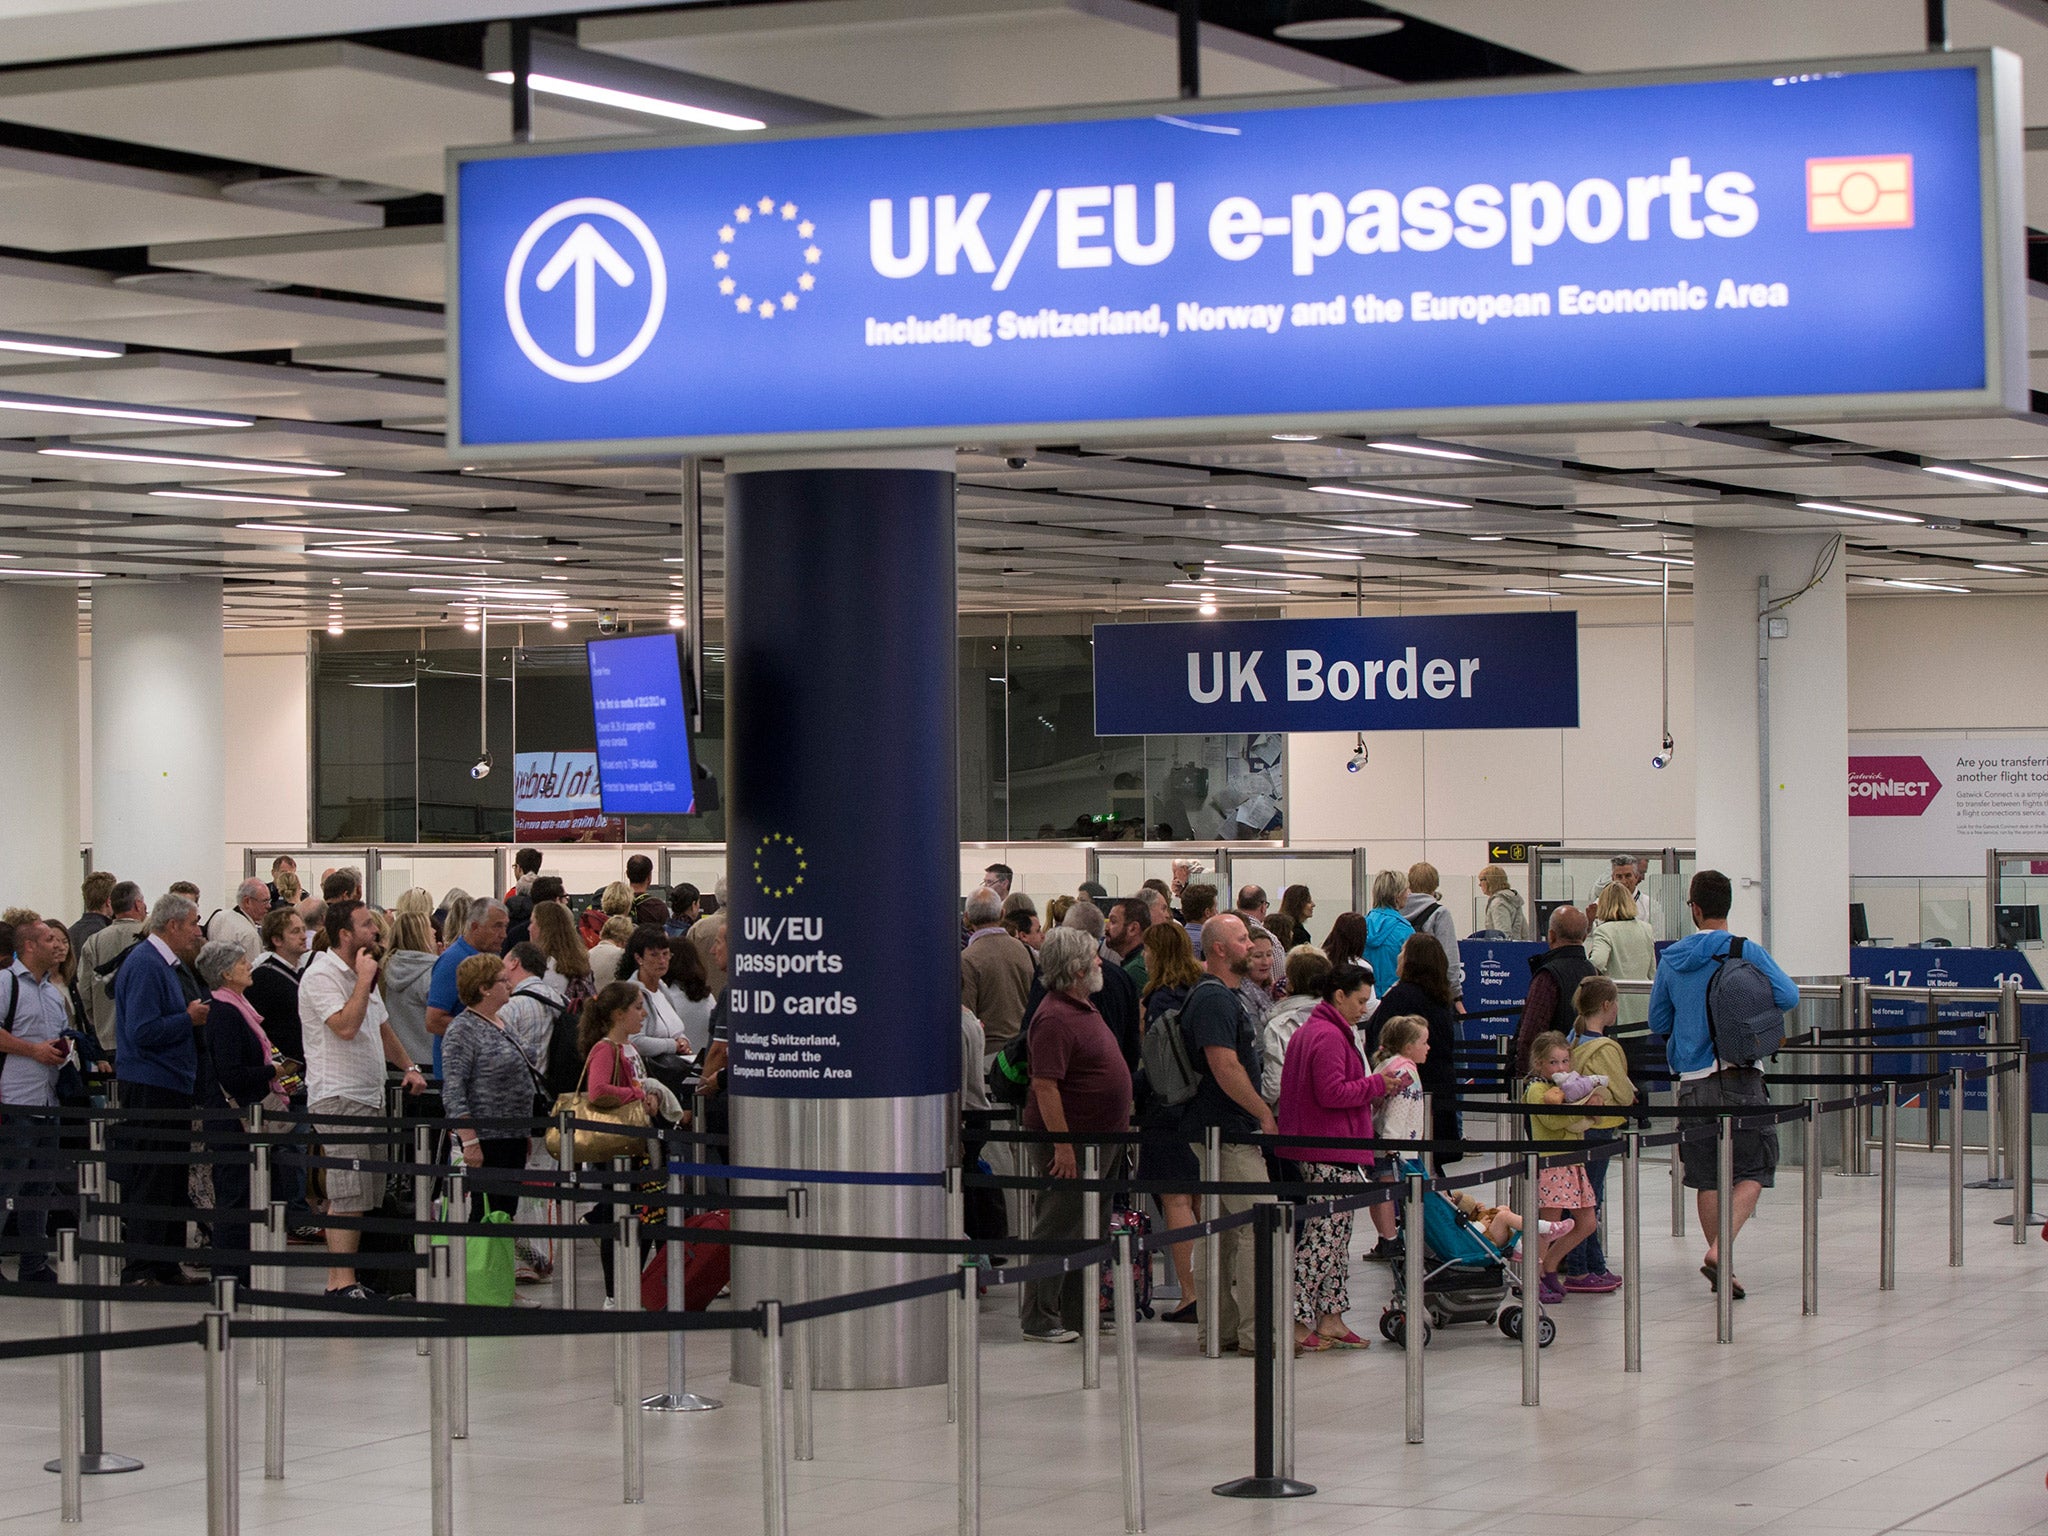 Migration has fallen from record levels recorded in the year to June 2015